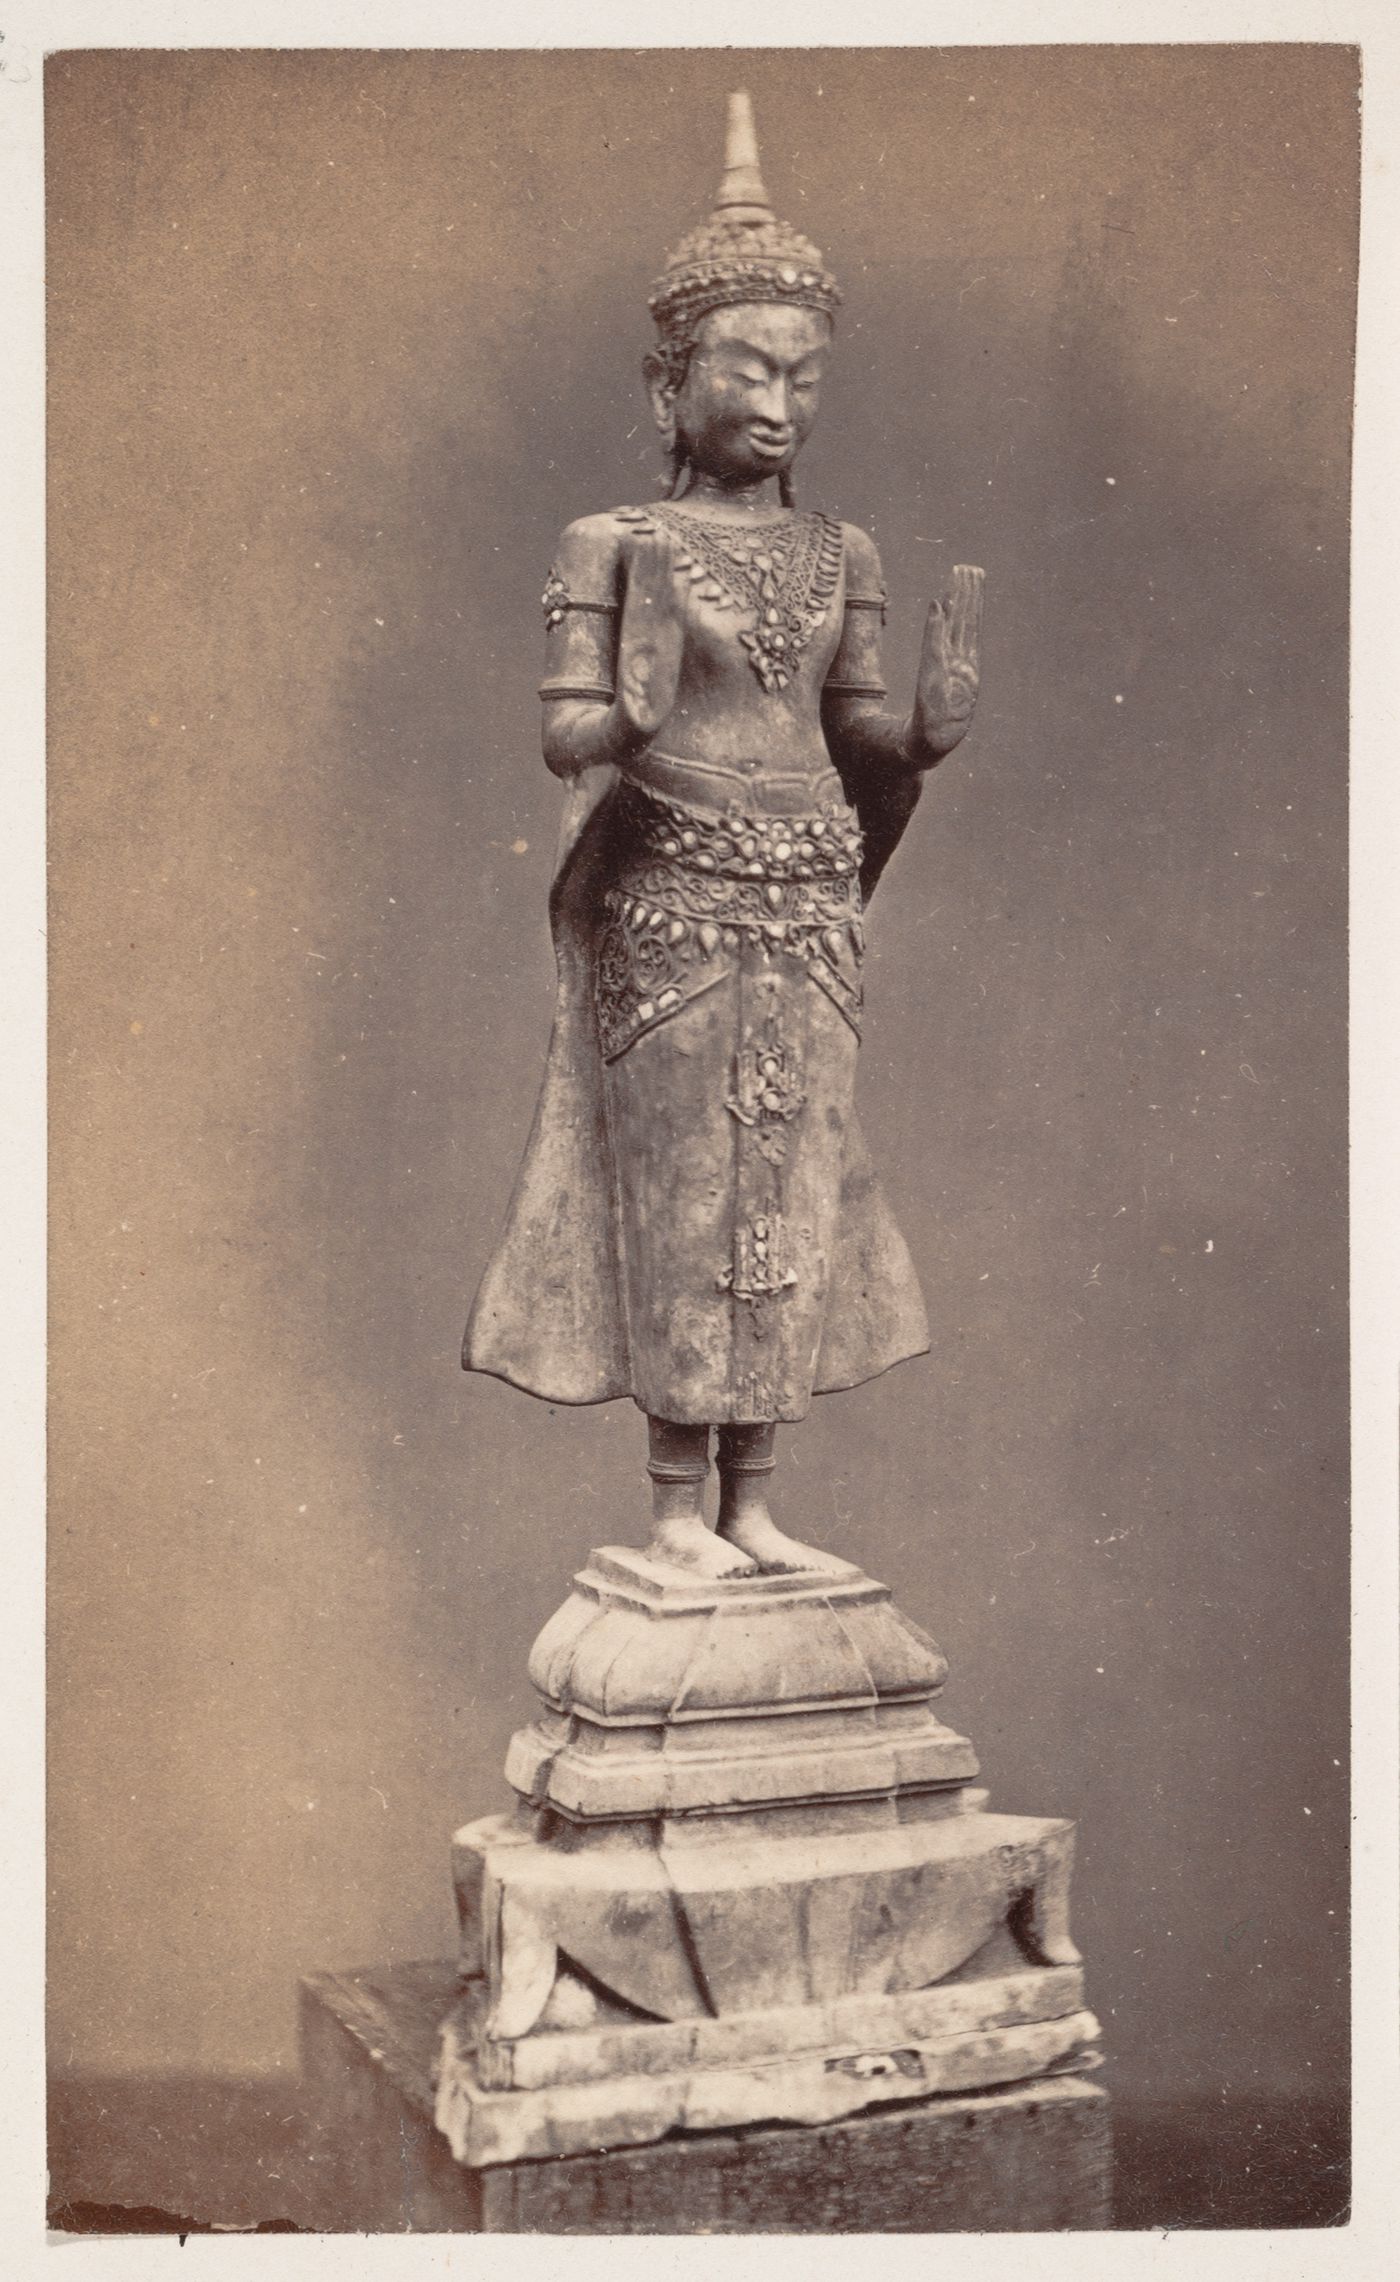 Interior view of a statue of Buddha, probably in Cambodia